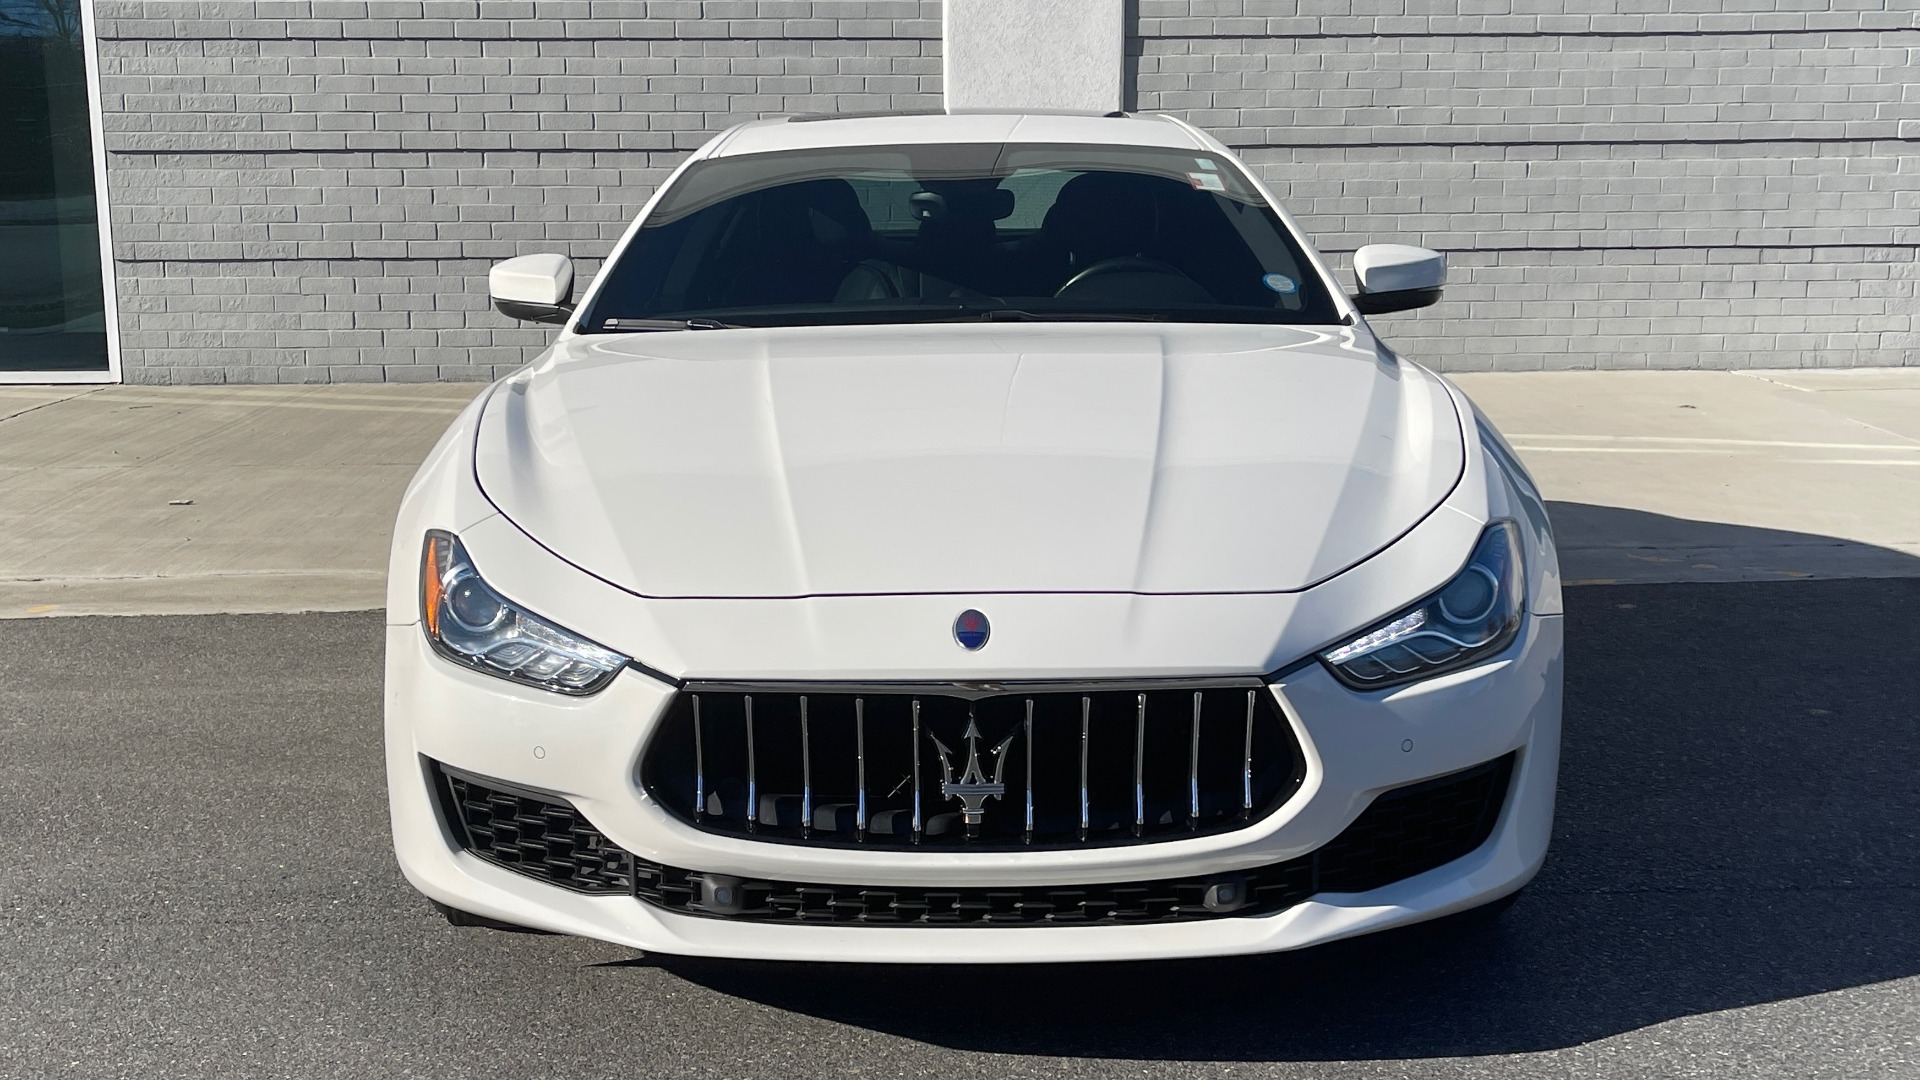 Used 2018 Maserati GHIBLI S Q4 3.0L SEDAN / AWD / NAV / SUNROOF / APPLE / HTD STS / REARVIEW for sale $49,995 at Formula Imports in Charlotte NC 28227 9